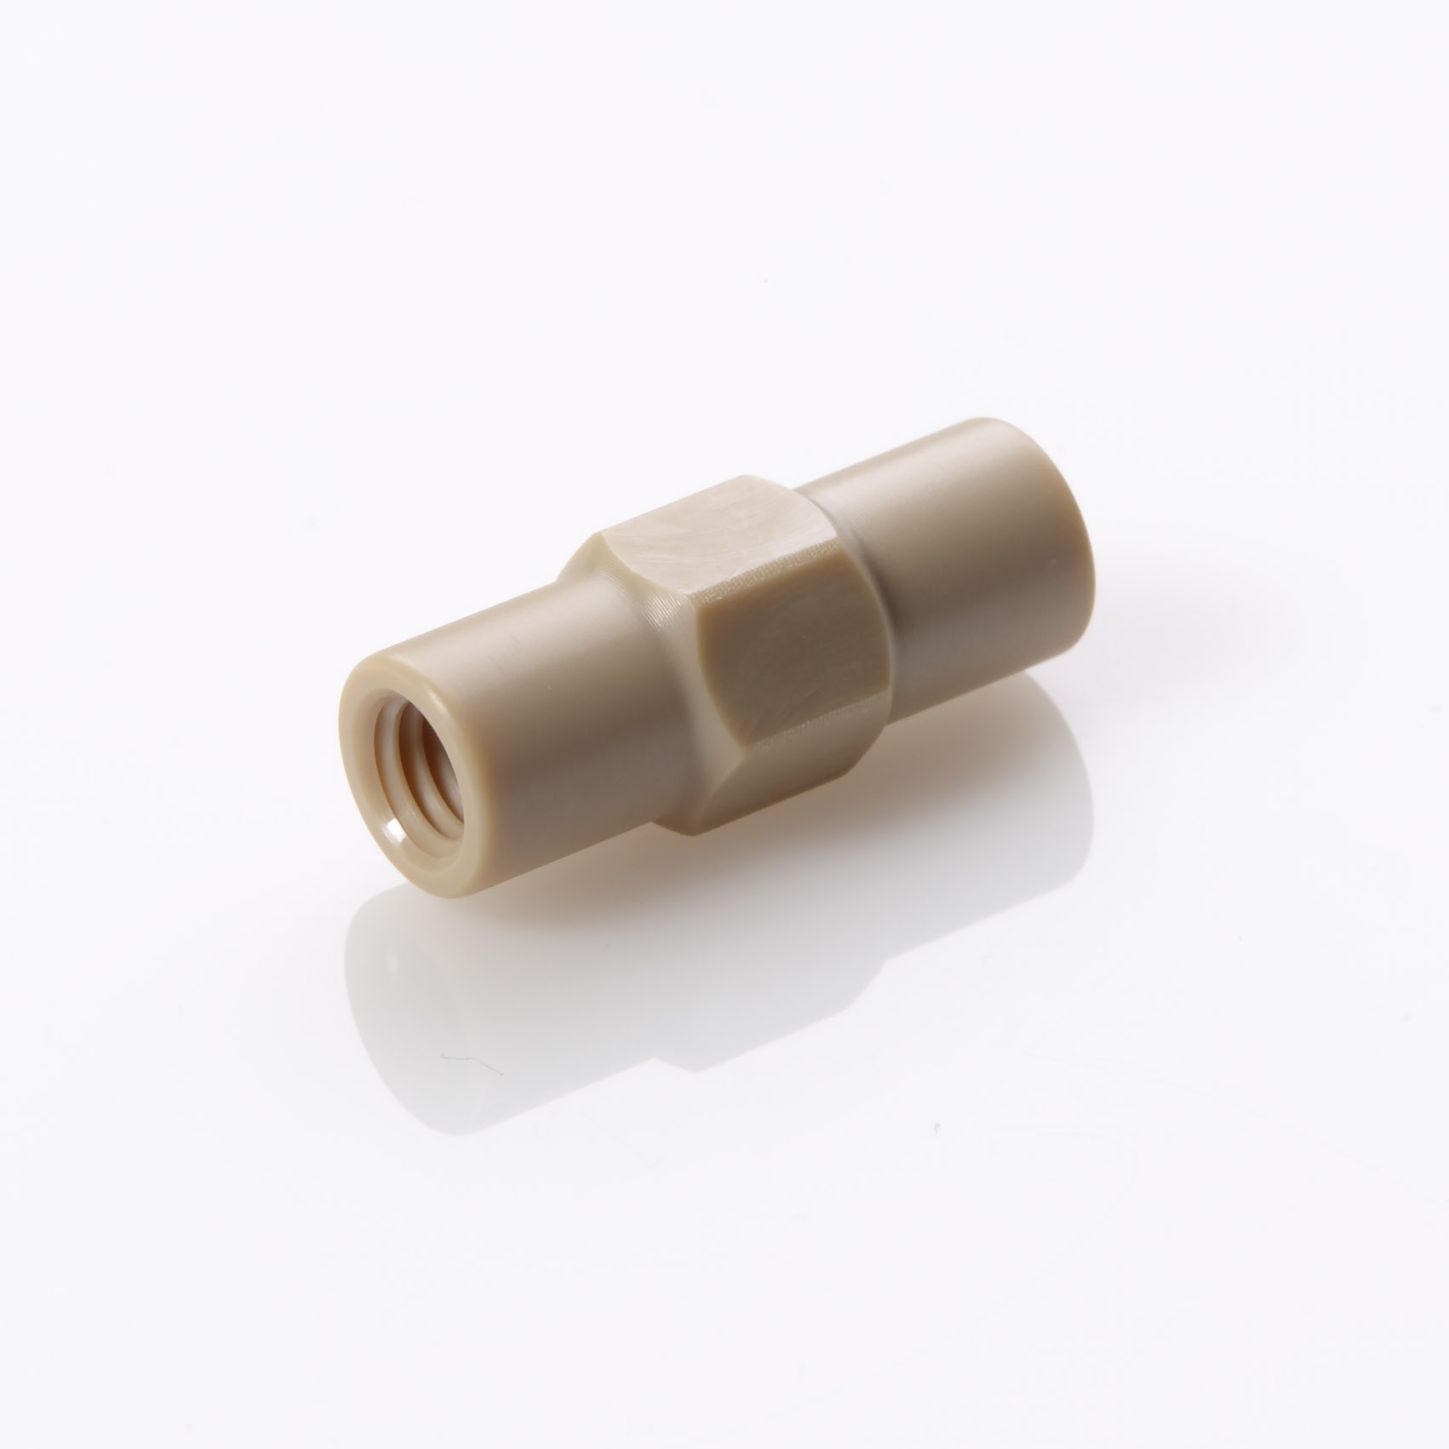 Connector Union PEEK™ 0.005 (0.25mm) Thru-Hole for 1/16" OD Tubing (Union Body Only)